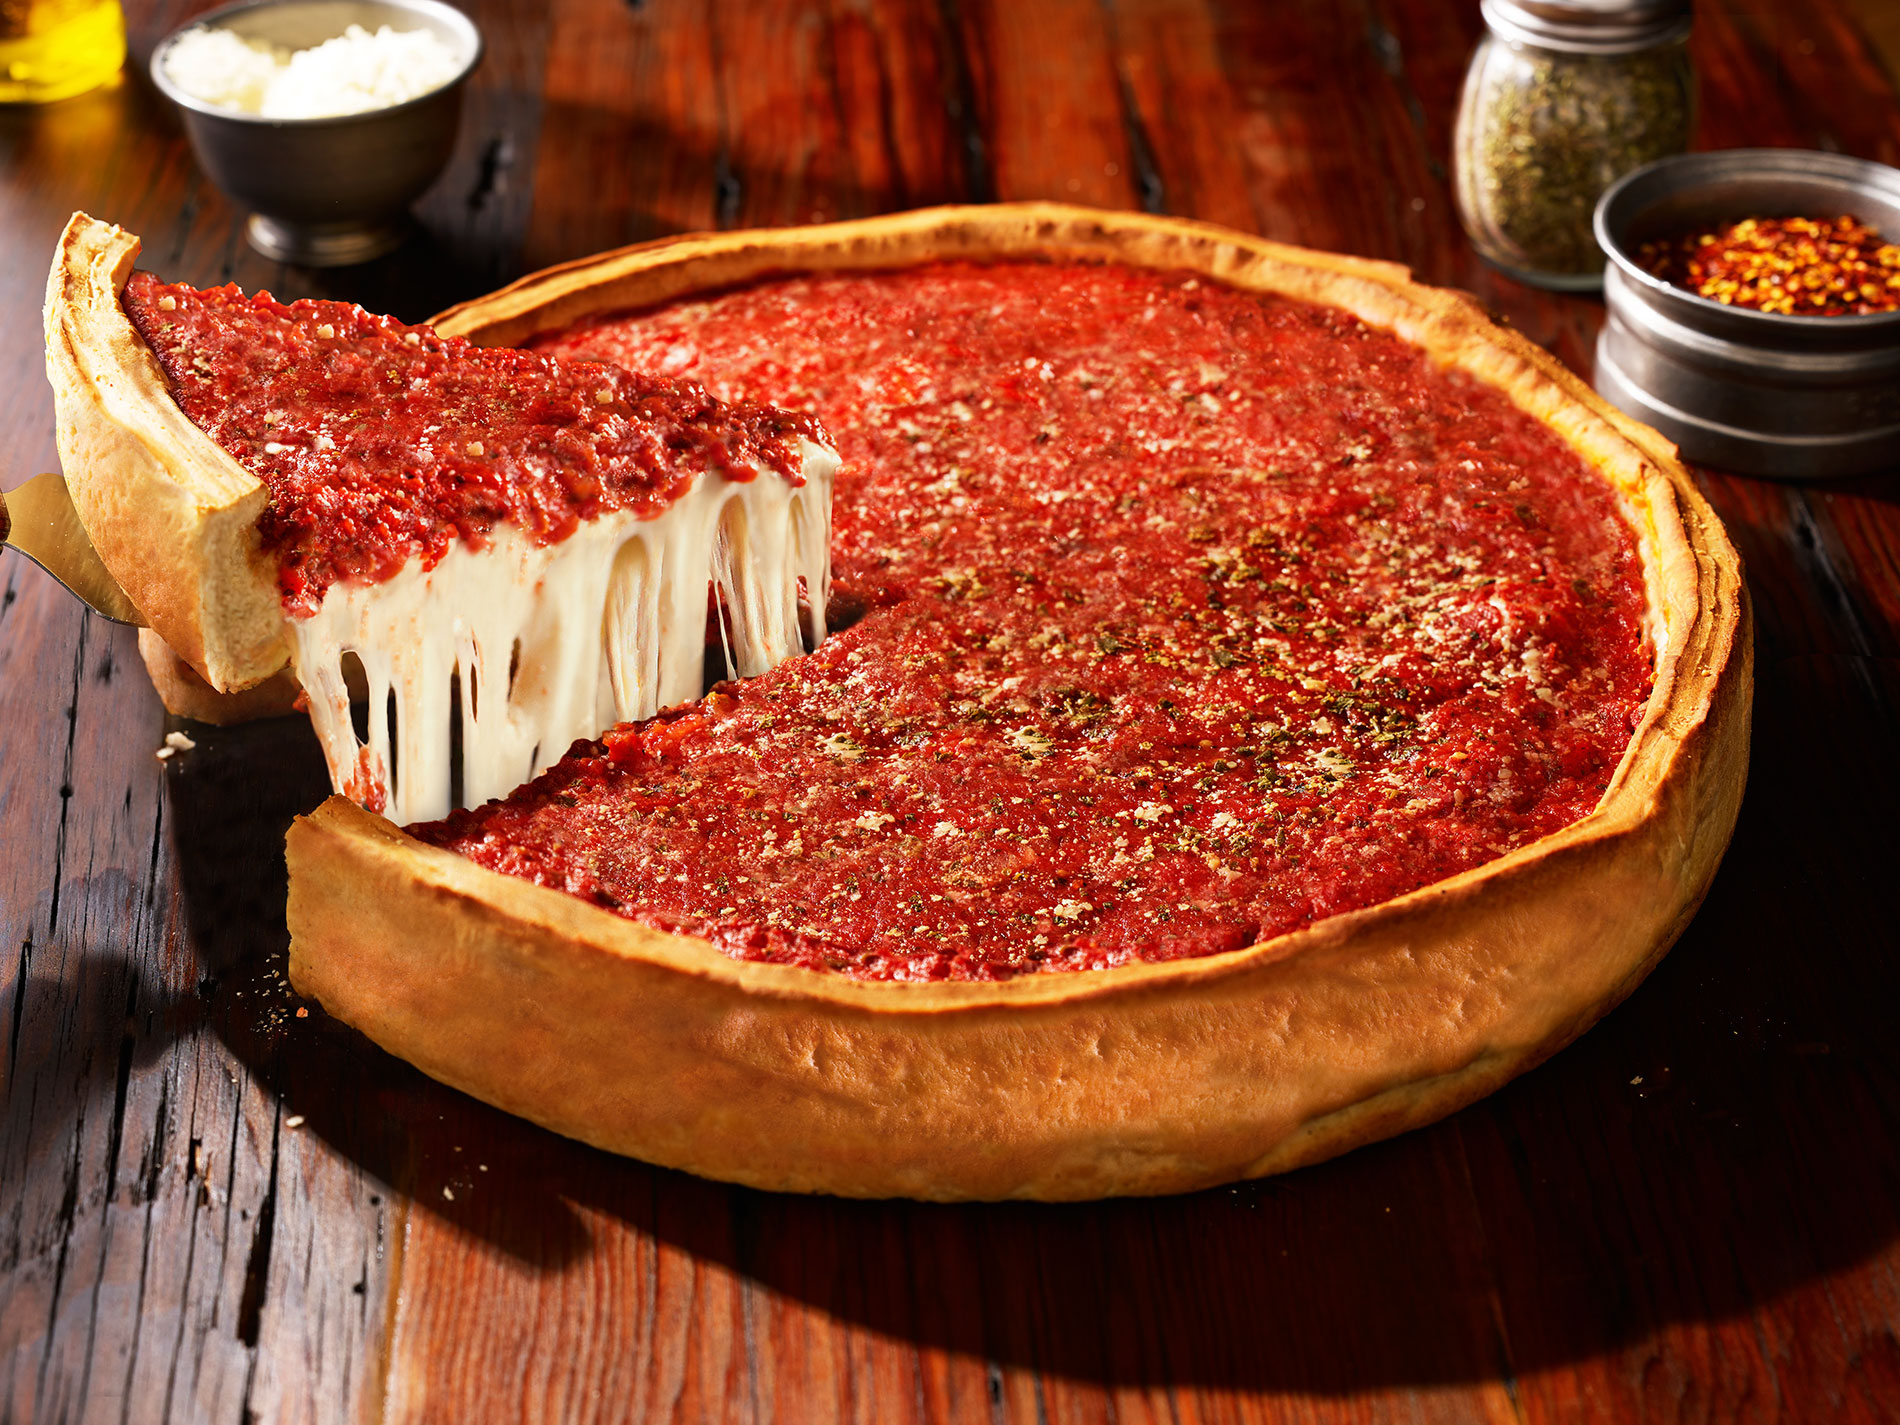 Famous Chicago Restaurant Offering Special Cubs Pizza For Limited Time